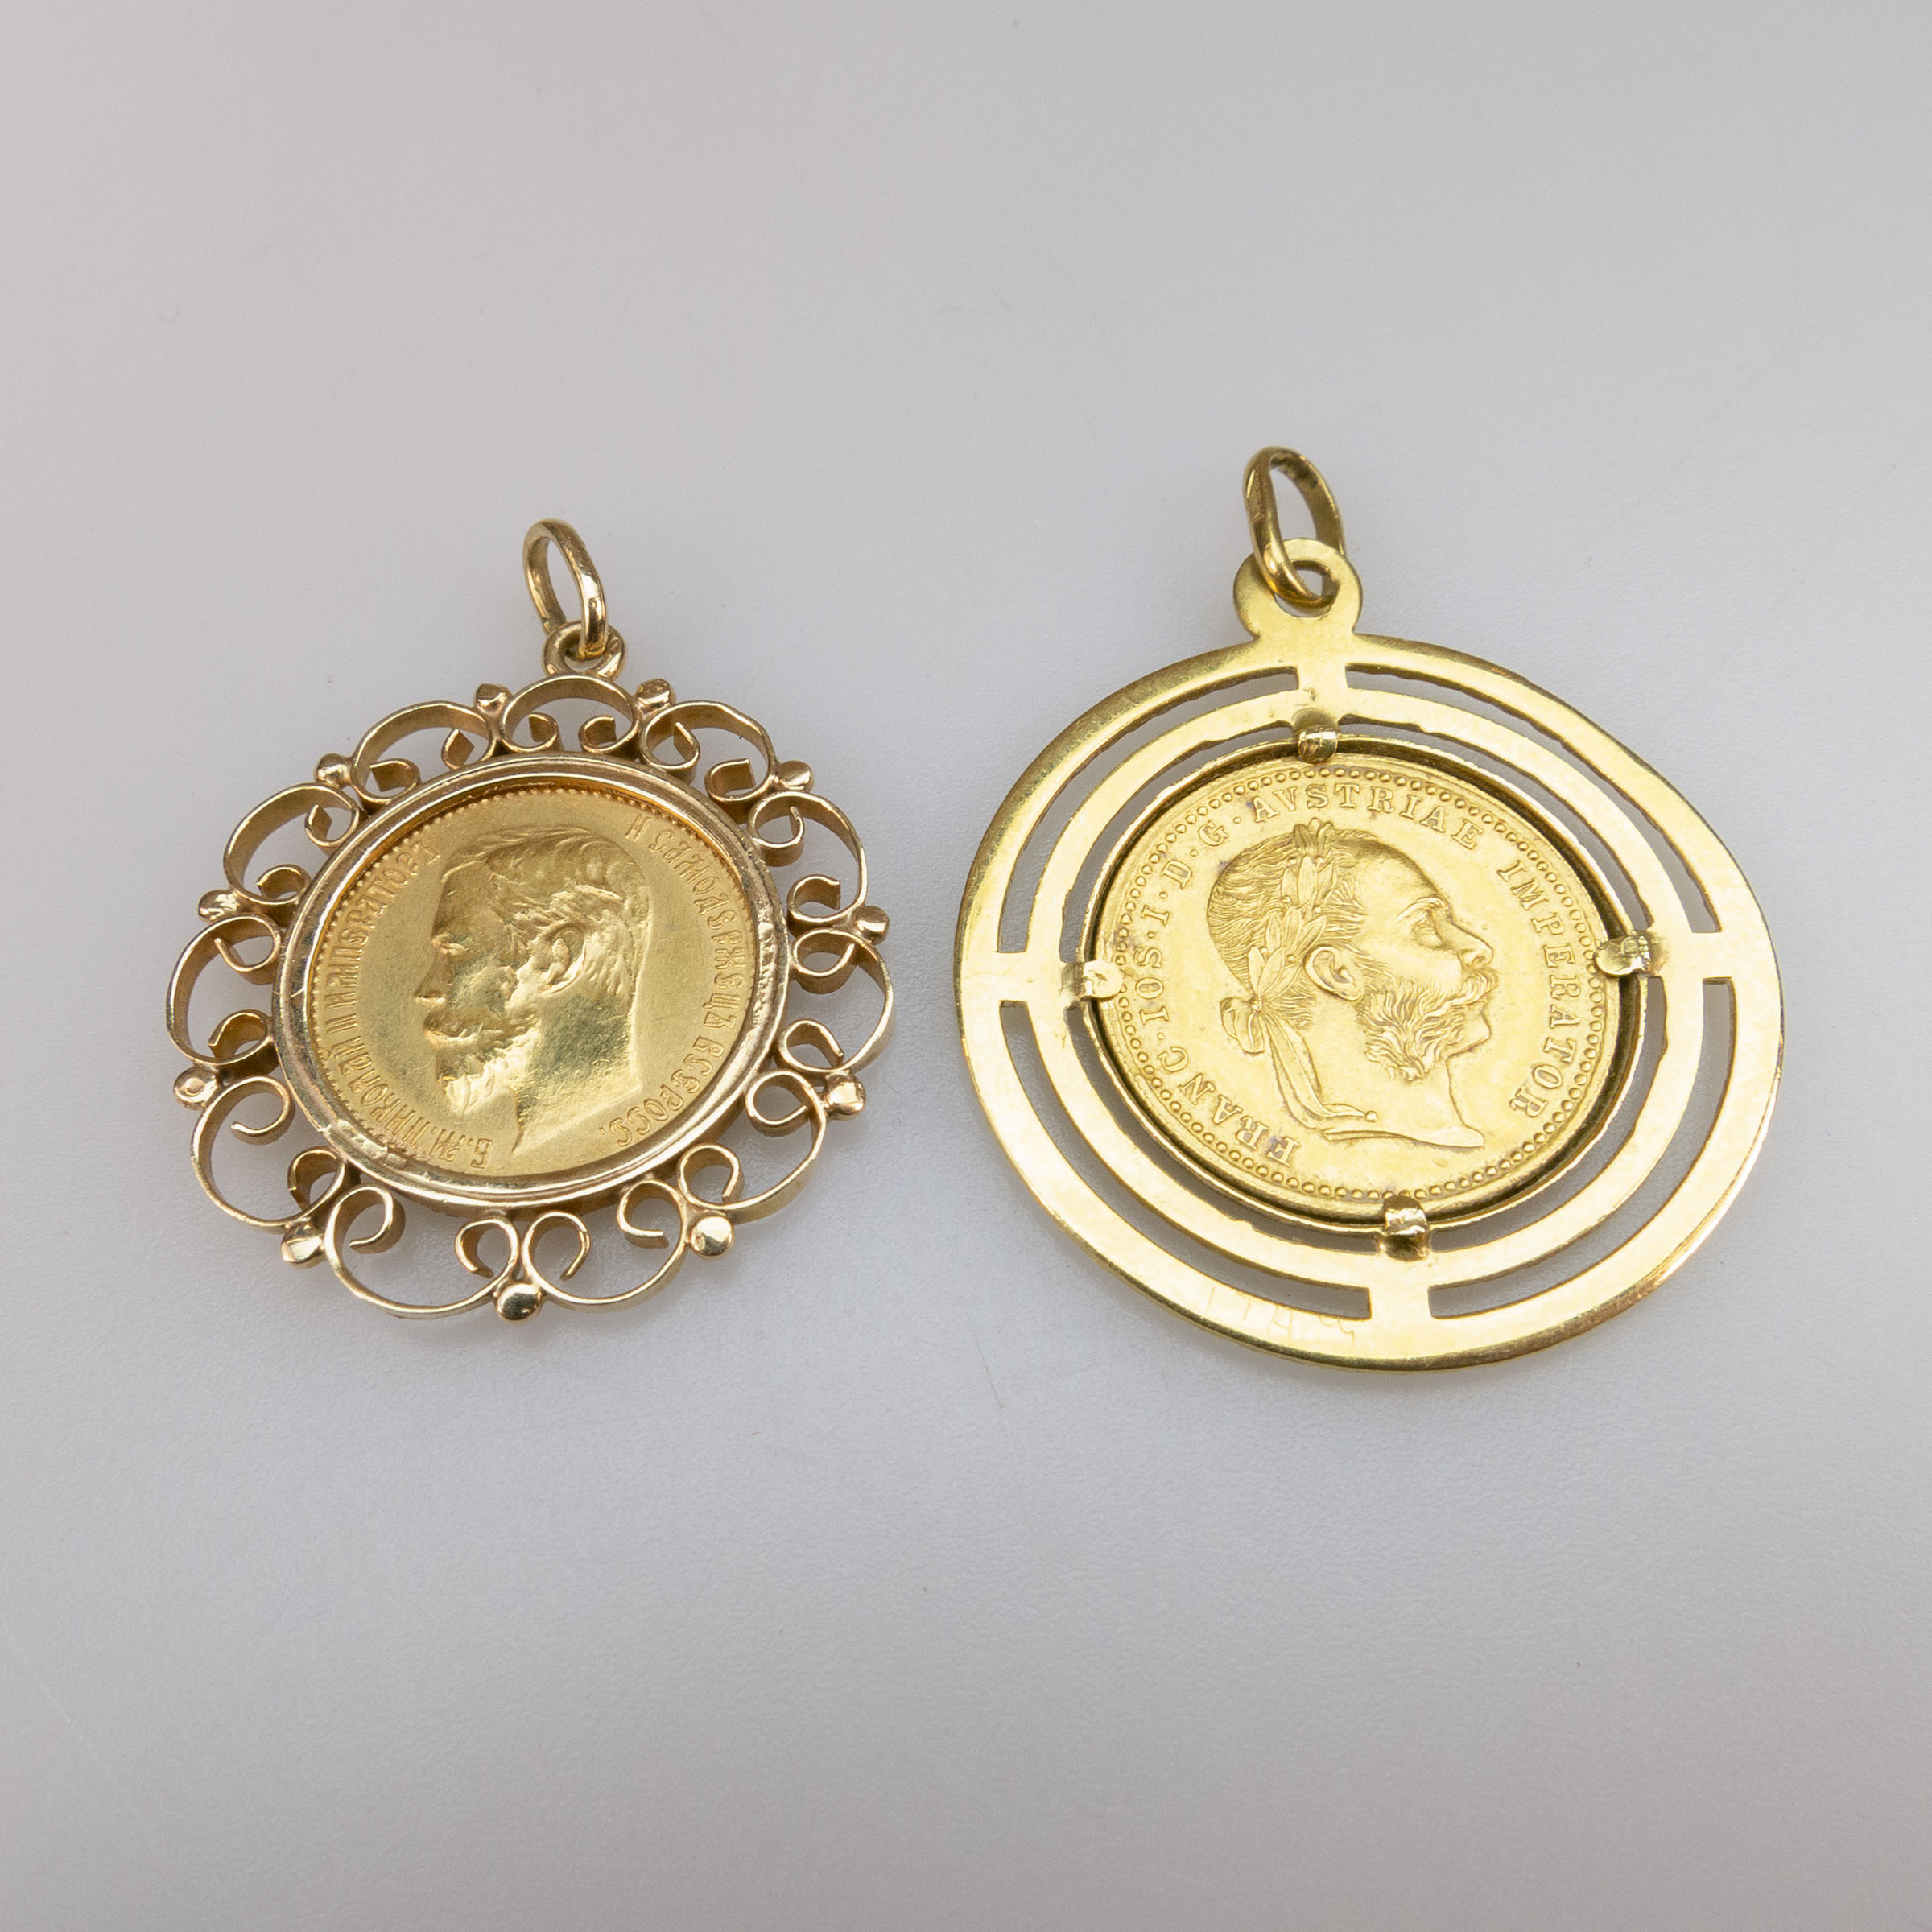 2 Gold Coins In Pendant Mounts